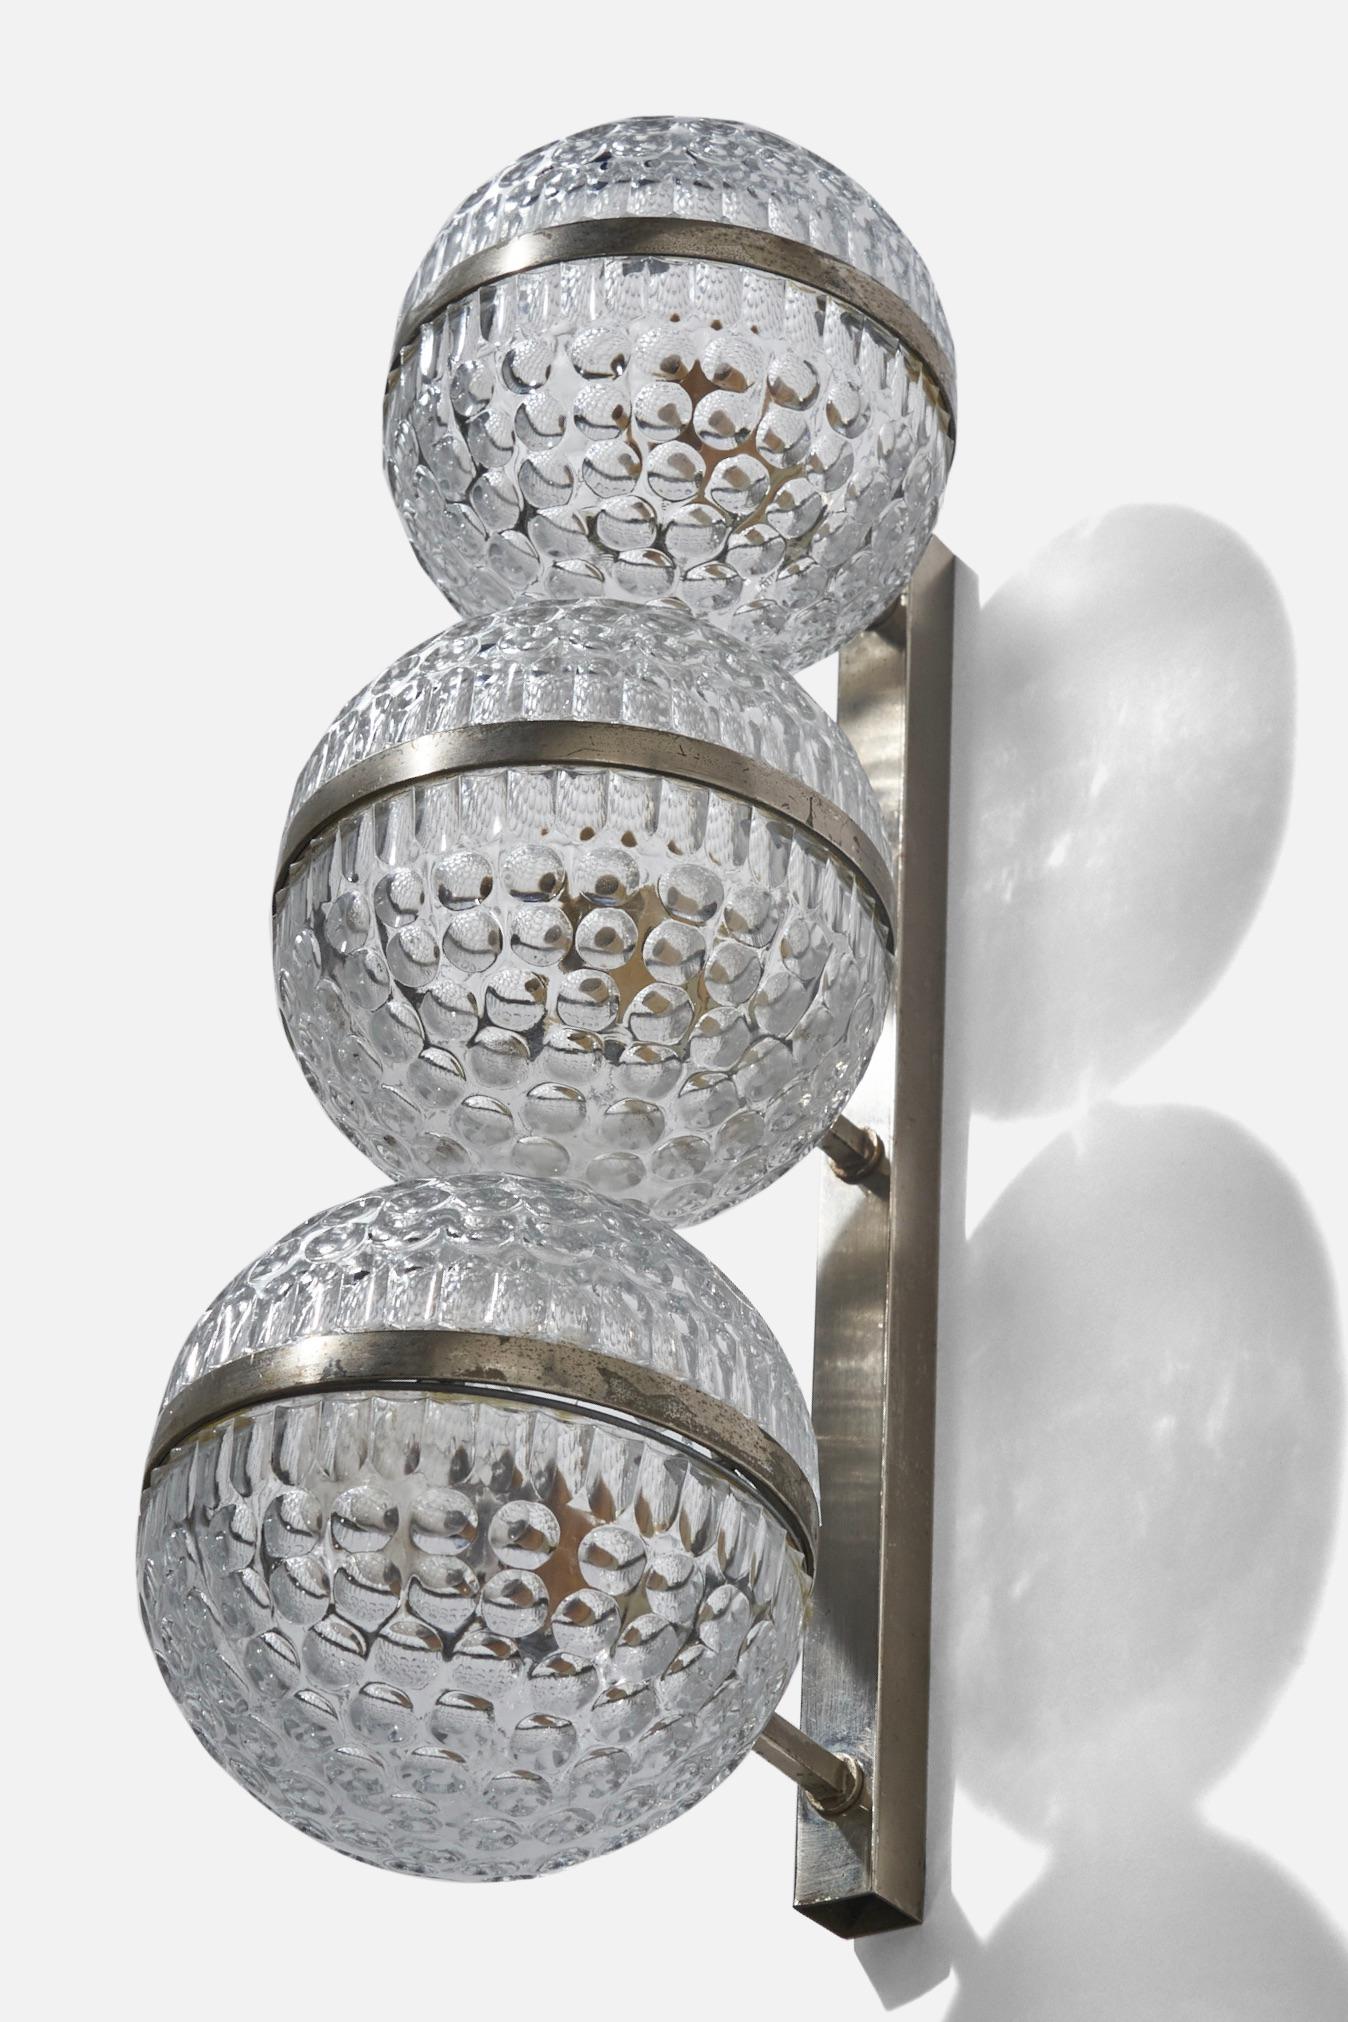 A glass and metal sconce / wall light designed and produced by an Italian designer, Italy, 1960s.

Dimensions of Back Plate (inches) : 13.81 x 0.78 x 0.78 (Height x Width x Depth).

Socket takes E-14 bulb.
There is no maximum wattage stated on